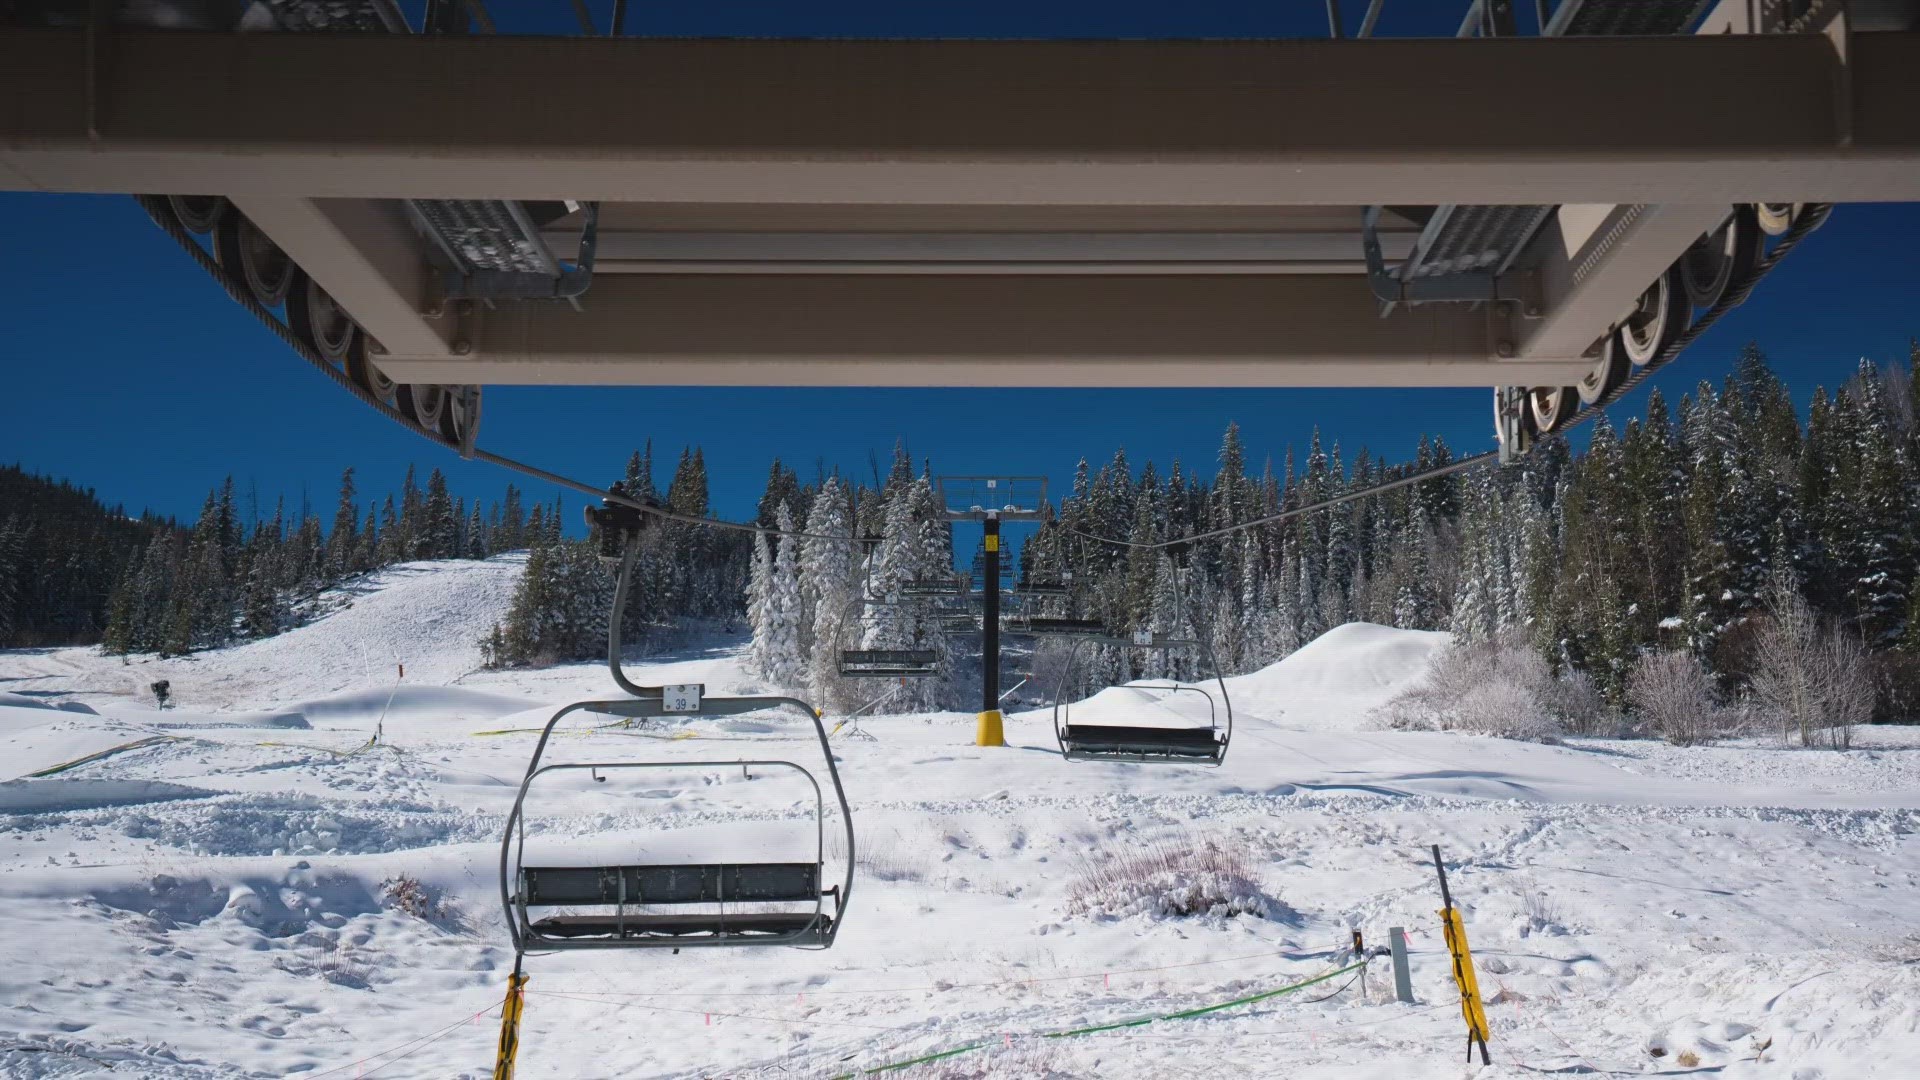 Winter Park Resort's lifts will start running Friday morning. The Gemini Express will be running at 9 a.m., with limited terrain.